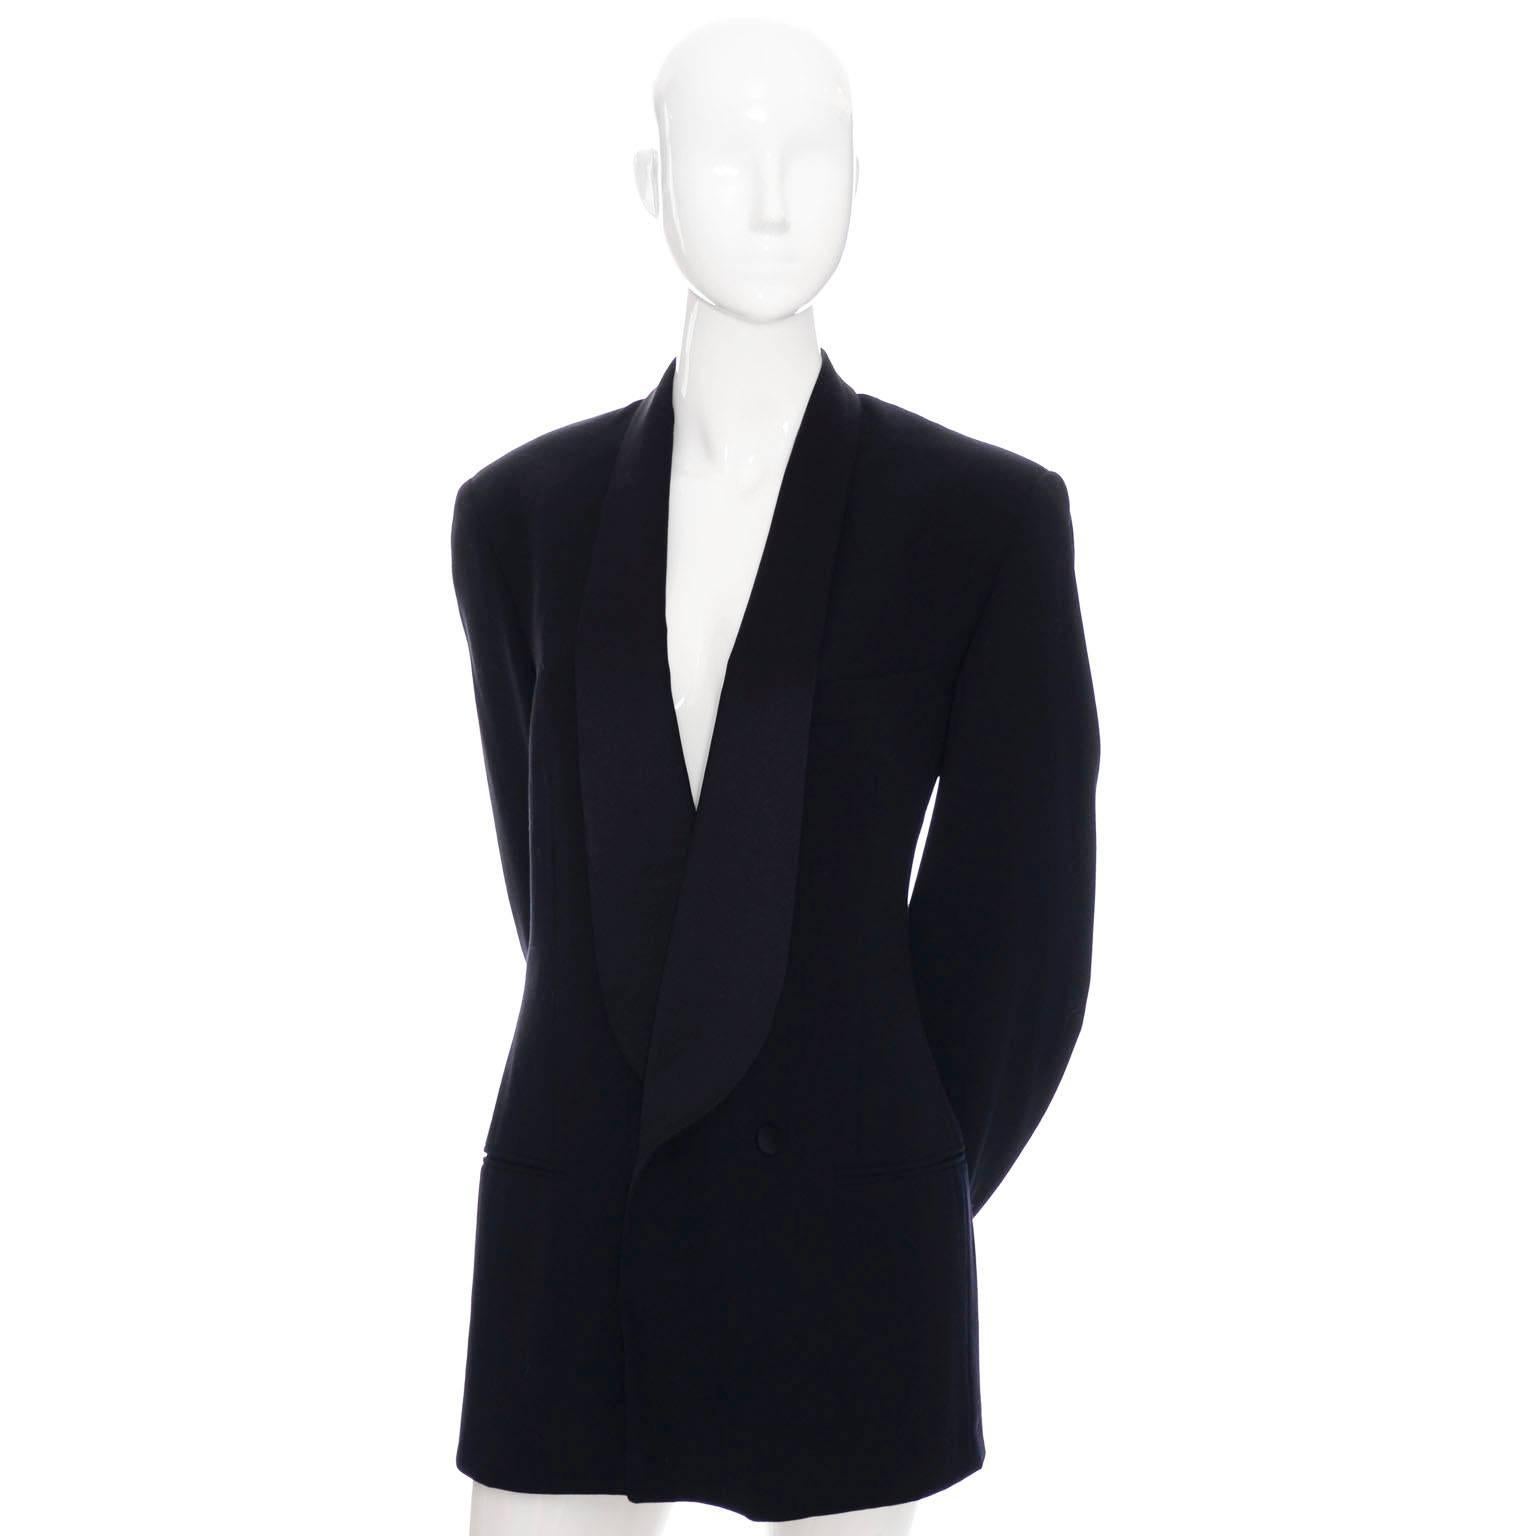 This incredible shawl collar vintage Armani Tuxedo jacket was made in Italy and has the Giorgio Armani black label, which indicates that it was made of Armani's finest materials and with exceptional details. This is one of the finer tuxedo jackets